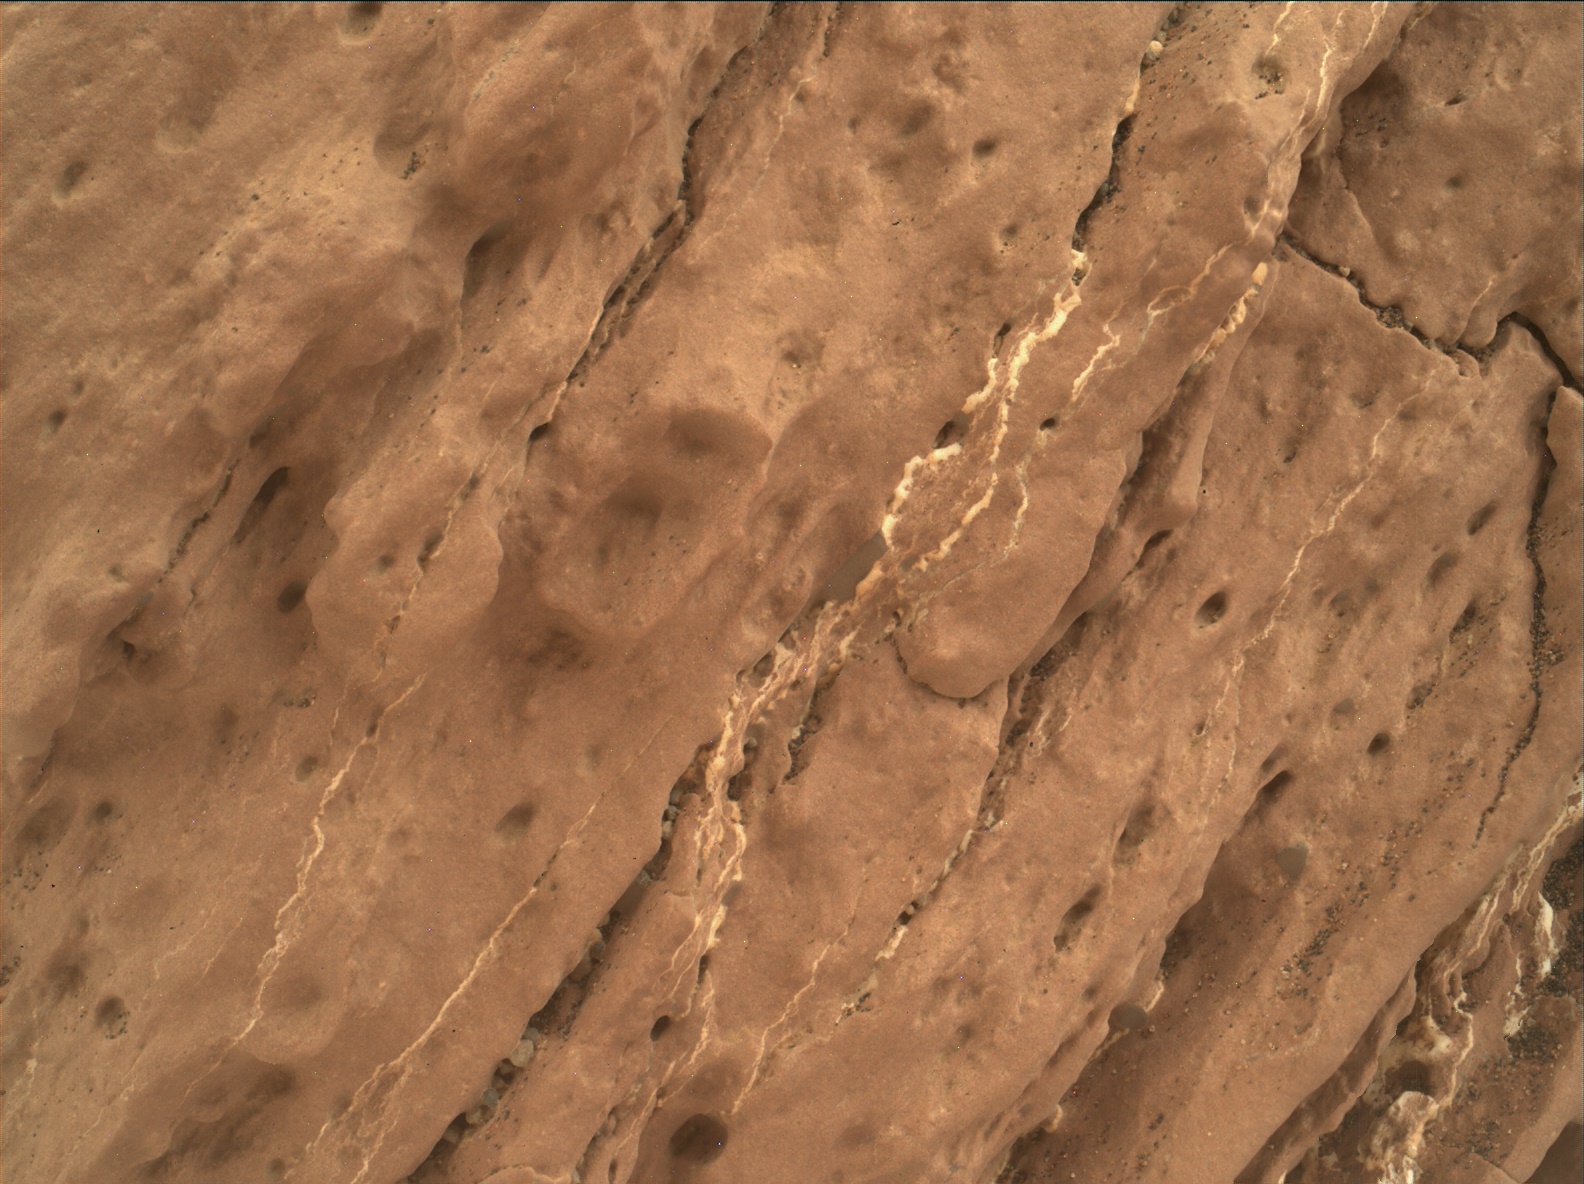 Nasa's Mars rover Curiosity acquired this image using its Mars Hand Lens Imager (MAHLI) on Sol 1555